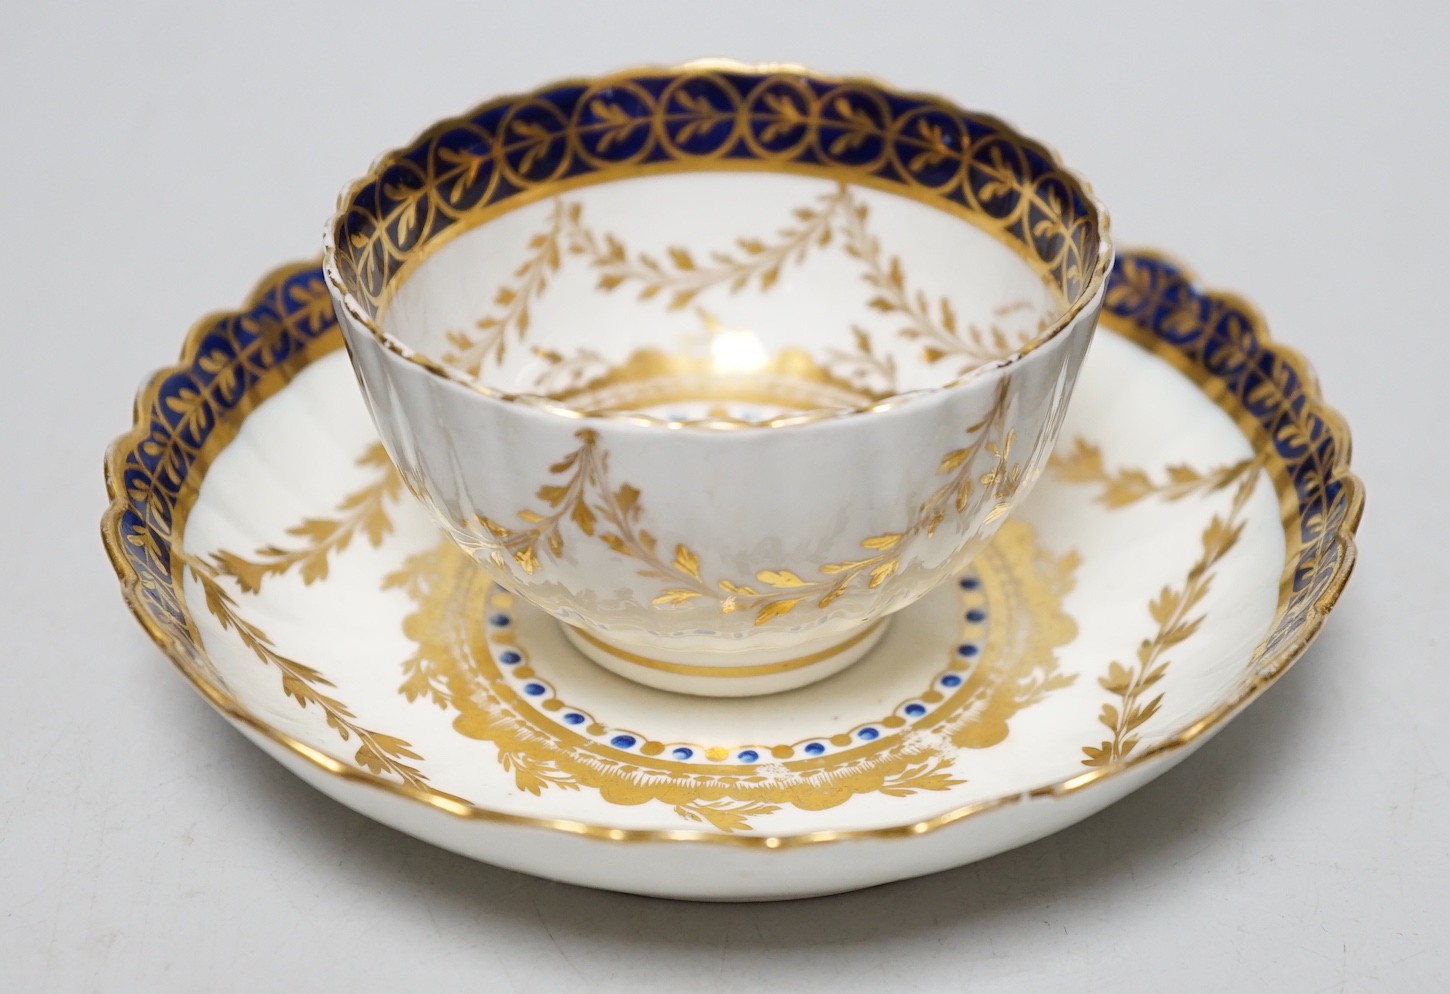 An 18th century Caughley rare teabowl and saucer painted with a crest of an arm clutching a dragon